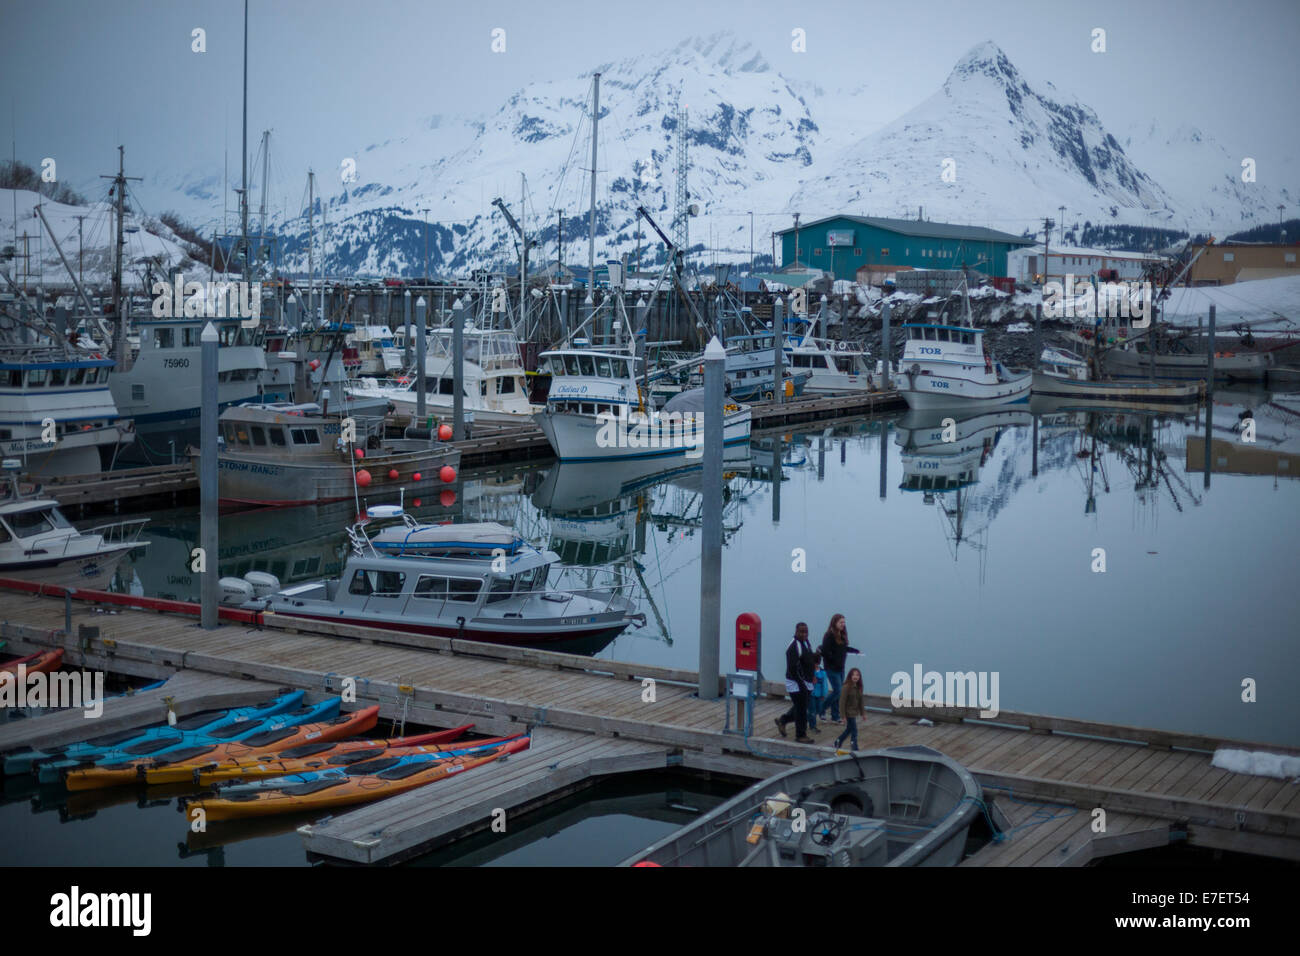 A family walks along a pier amongst sea kayaks and fishing boats at the harbor in Valdez, Alaska. Peaks of the Chugach Mountains are visible across the fjord. Stock Photo